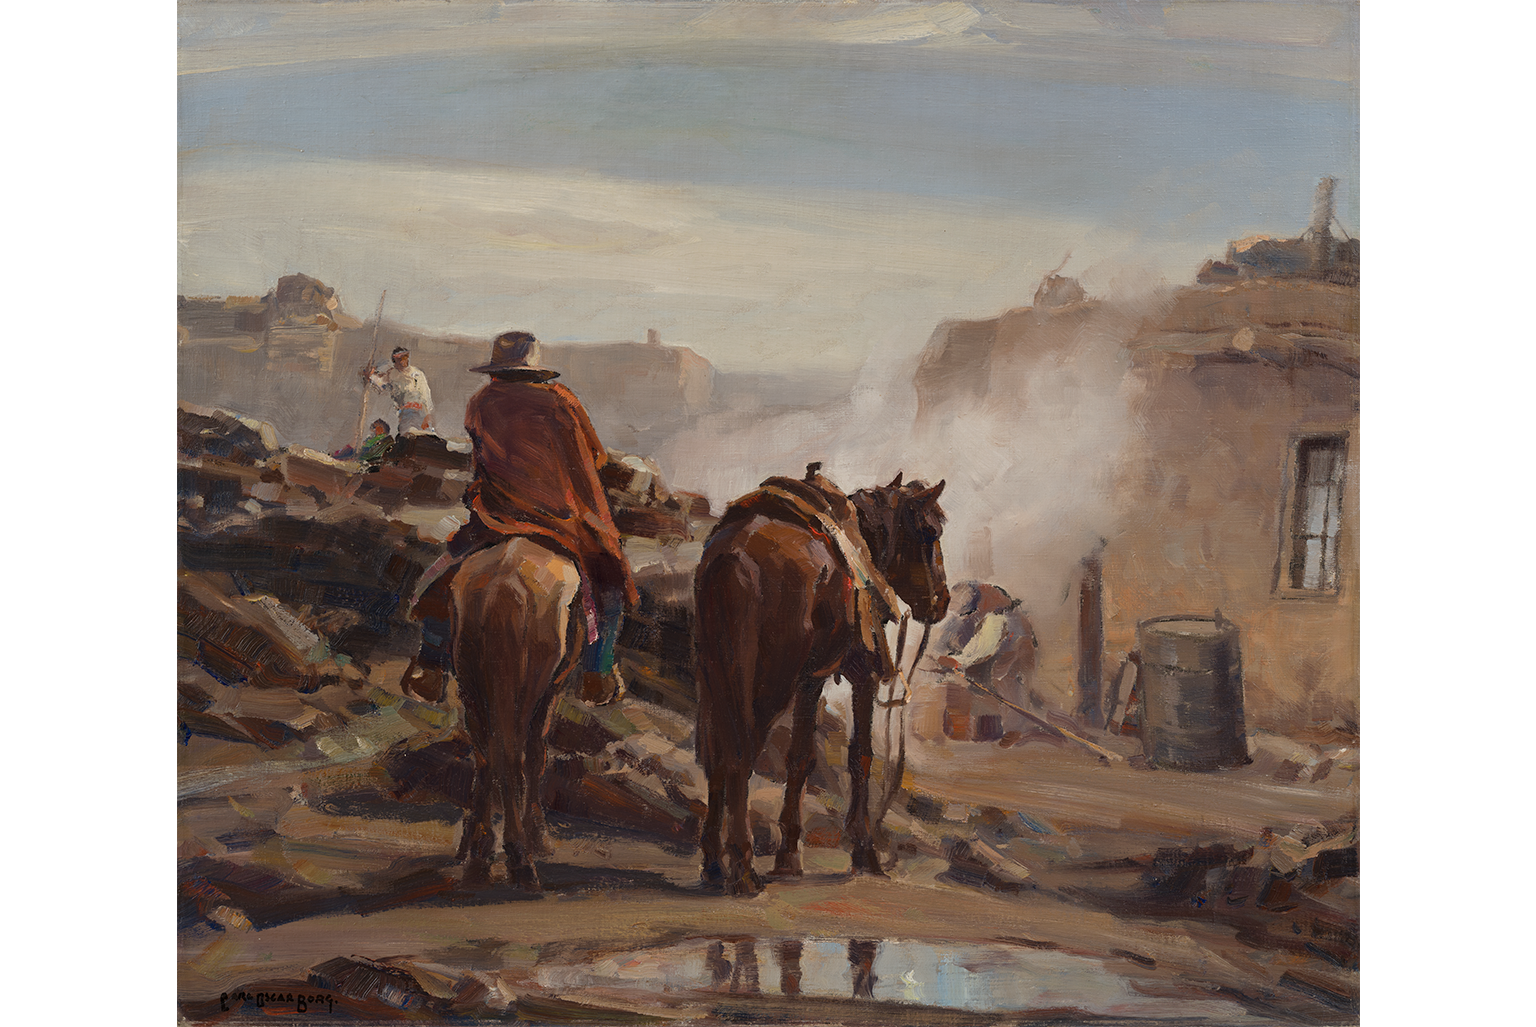 Carl Oscar Borg, In Walpi, Arizona, circa 1934, Oil on canvas, 26 x 30 in. The Buck Collection at UCI Jack and Shanaz Langson Institute and Museum of California Art